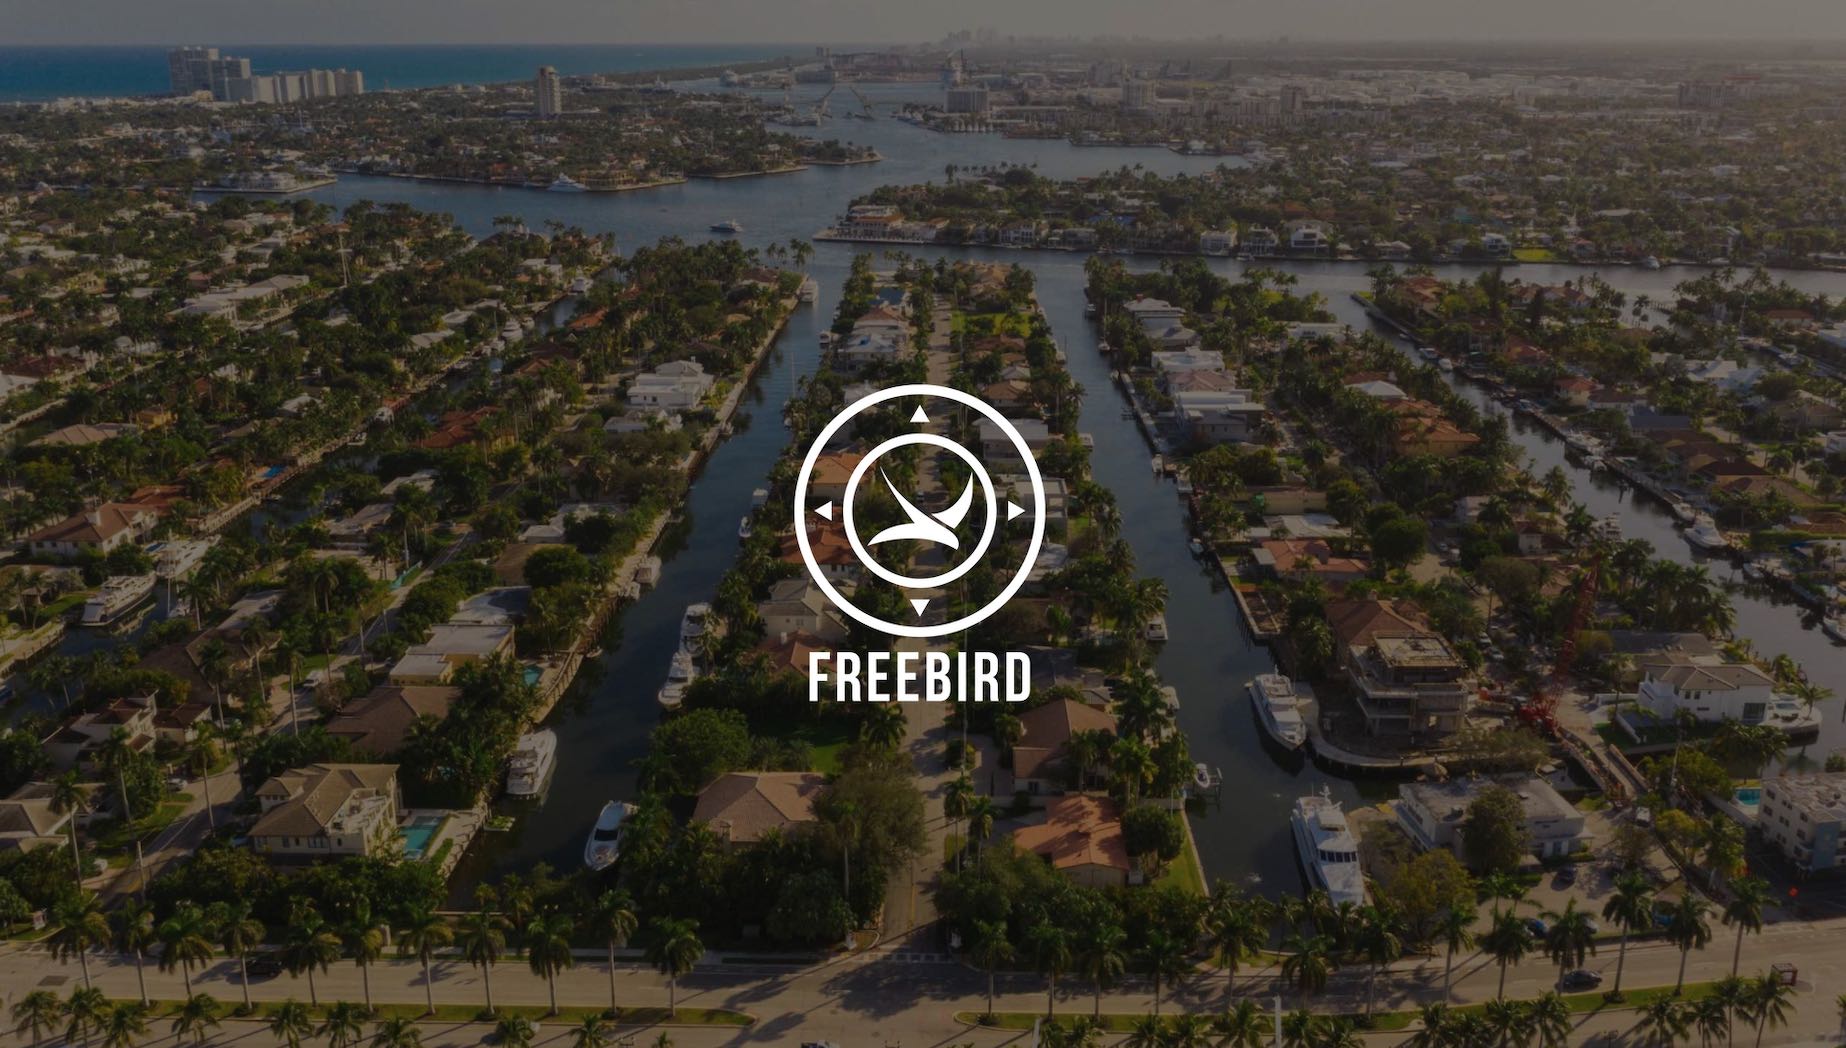 White Freebird logo website development on dimmed background aerial view of houses with canals with boats anchored